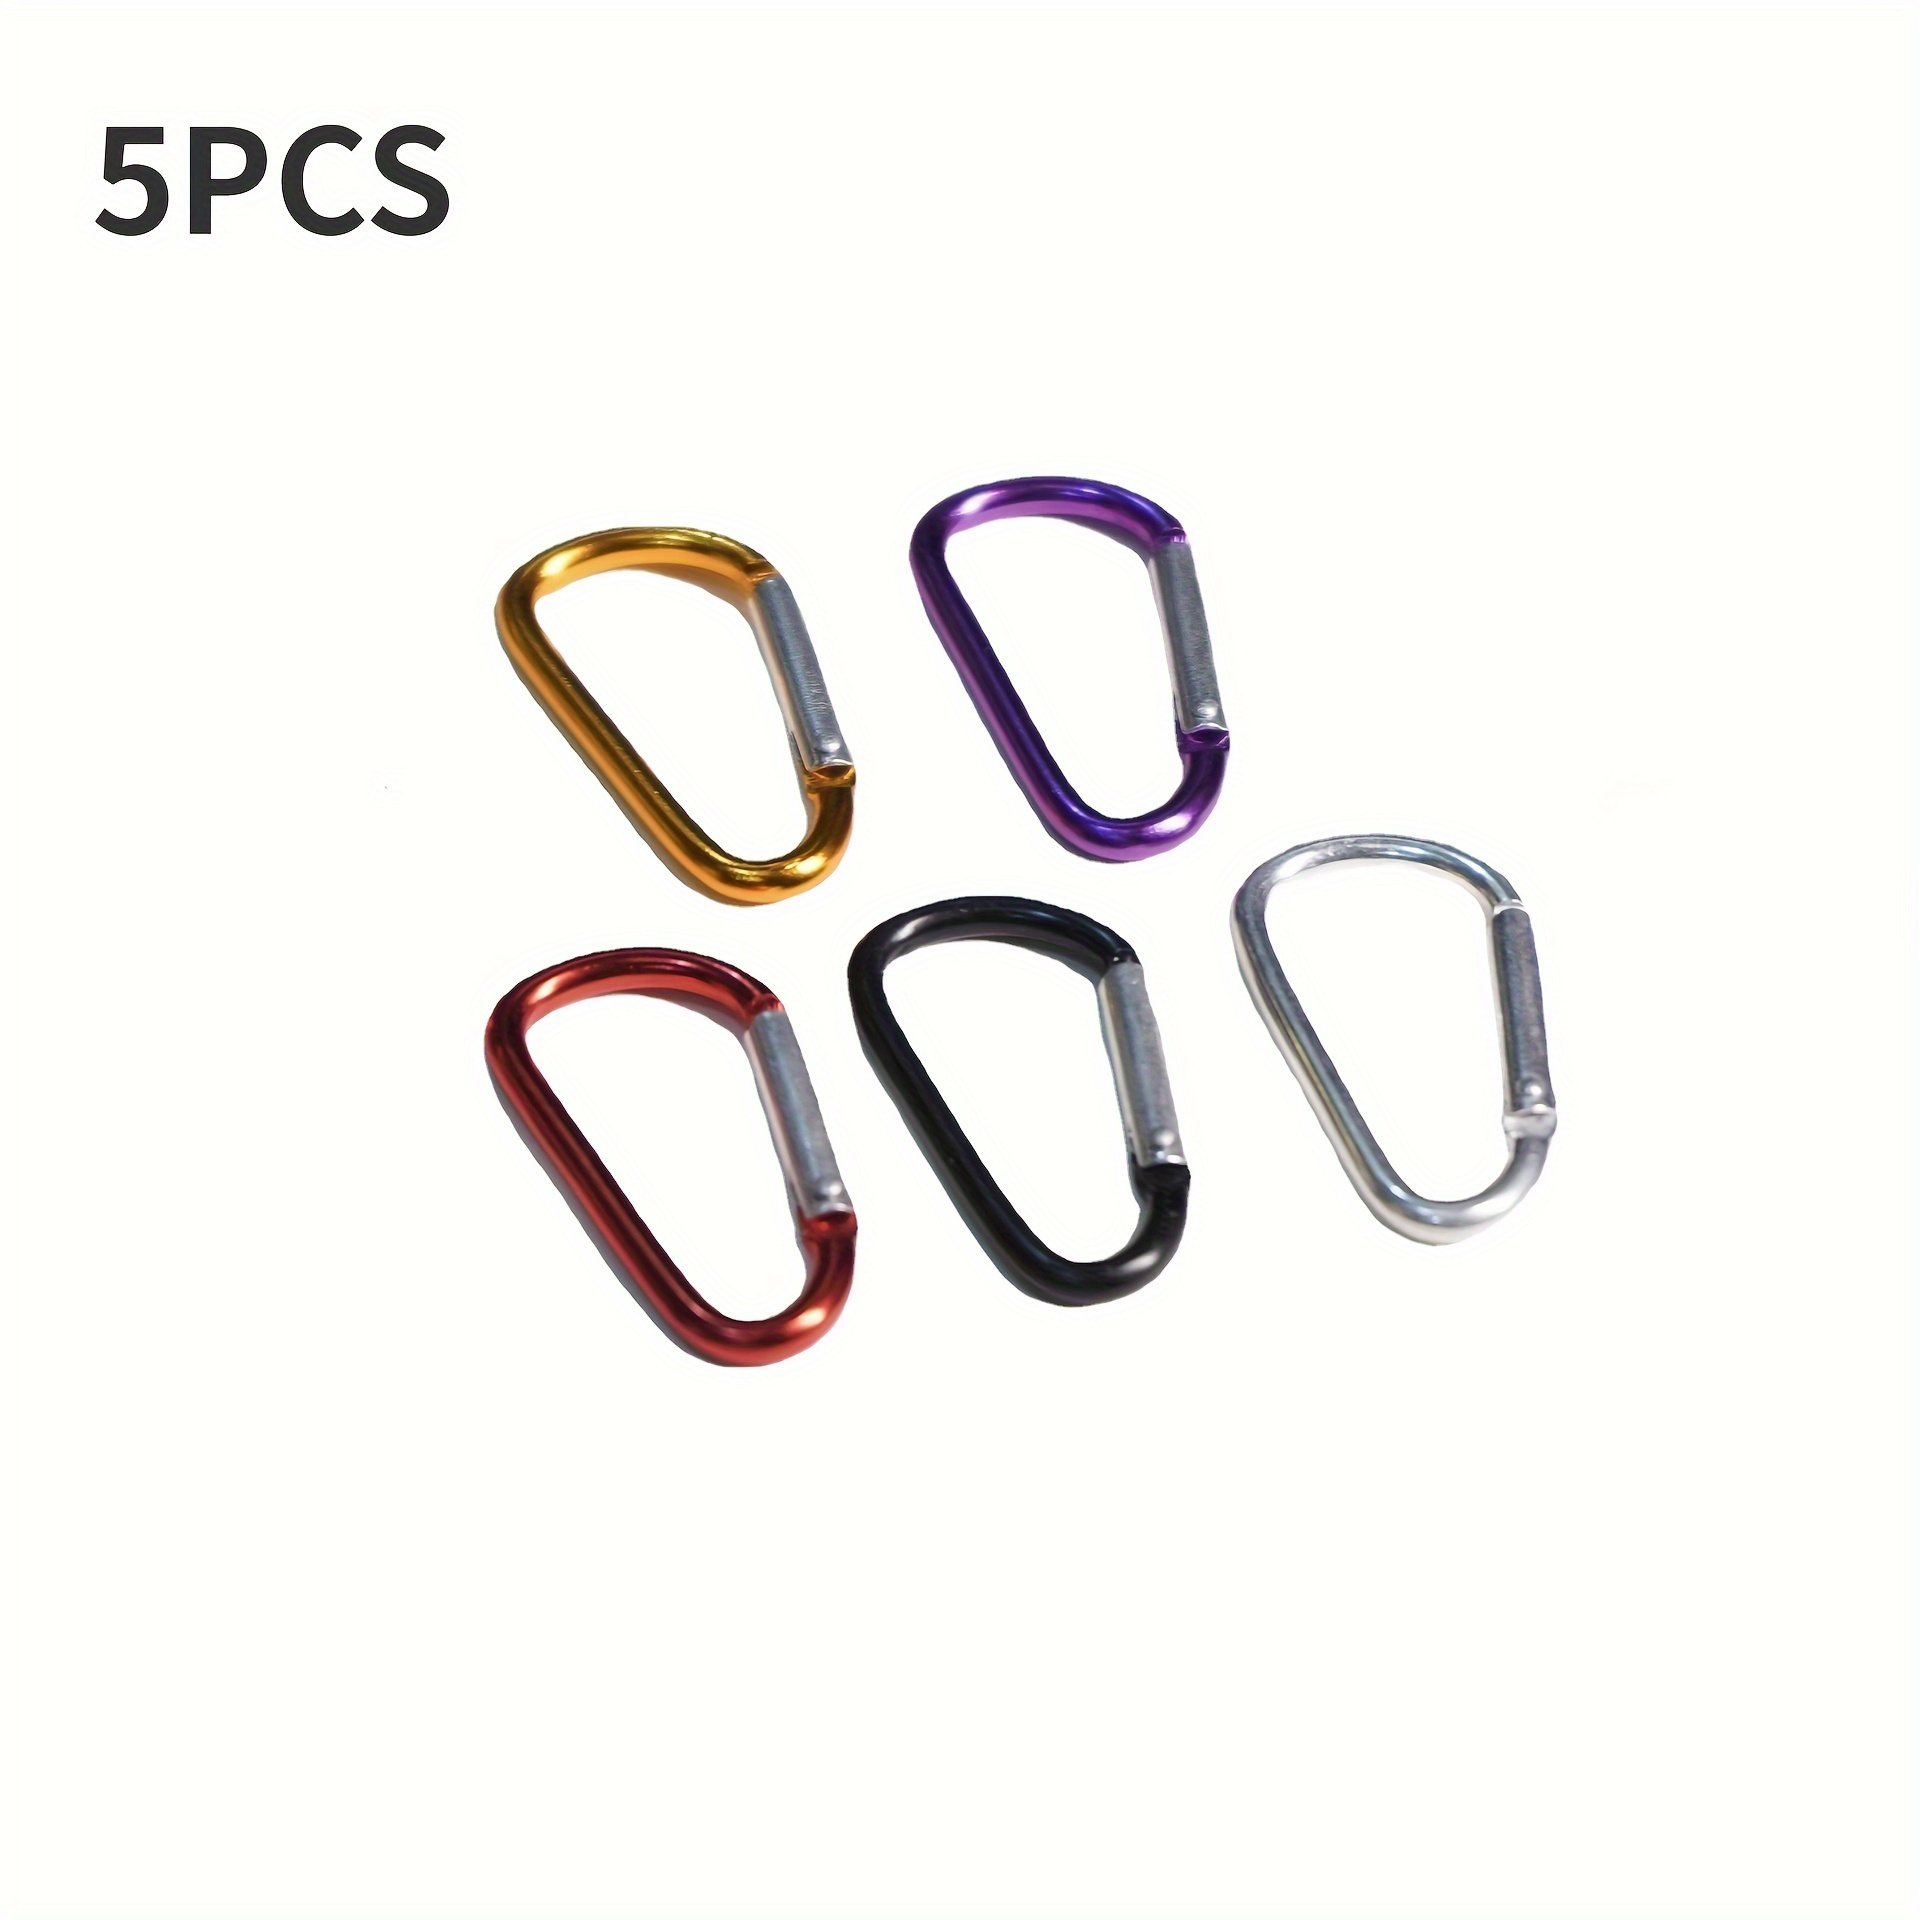 5pcs D Shaped Buckle Keychain Clip Spring Snap Hook Key Chain